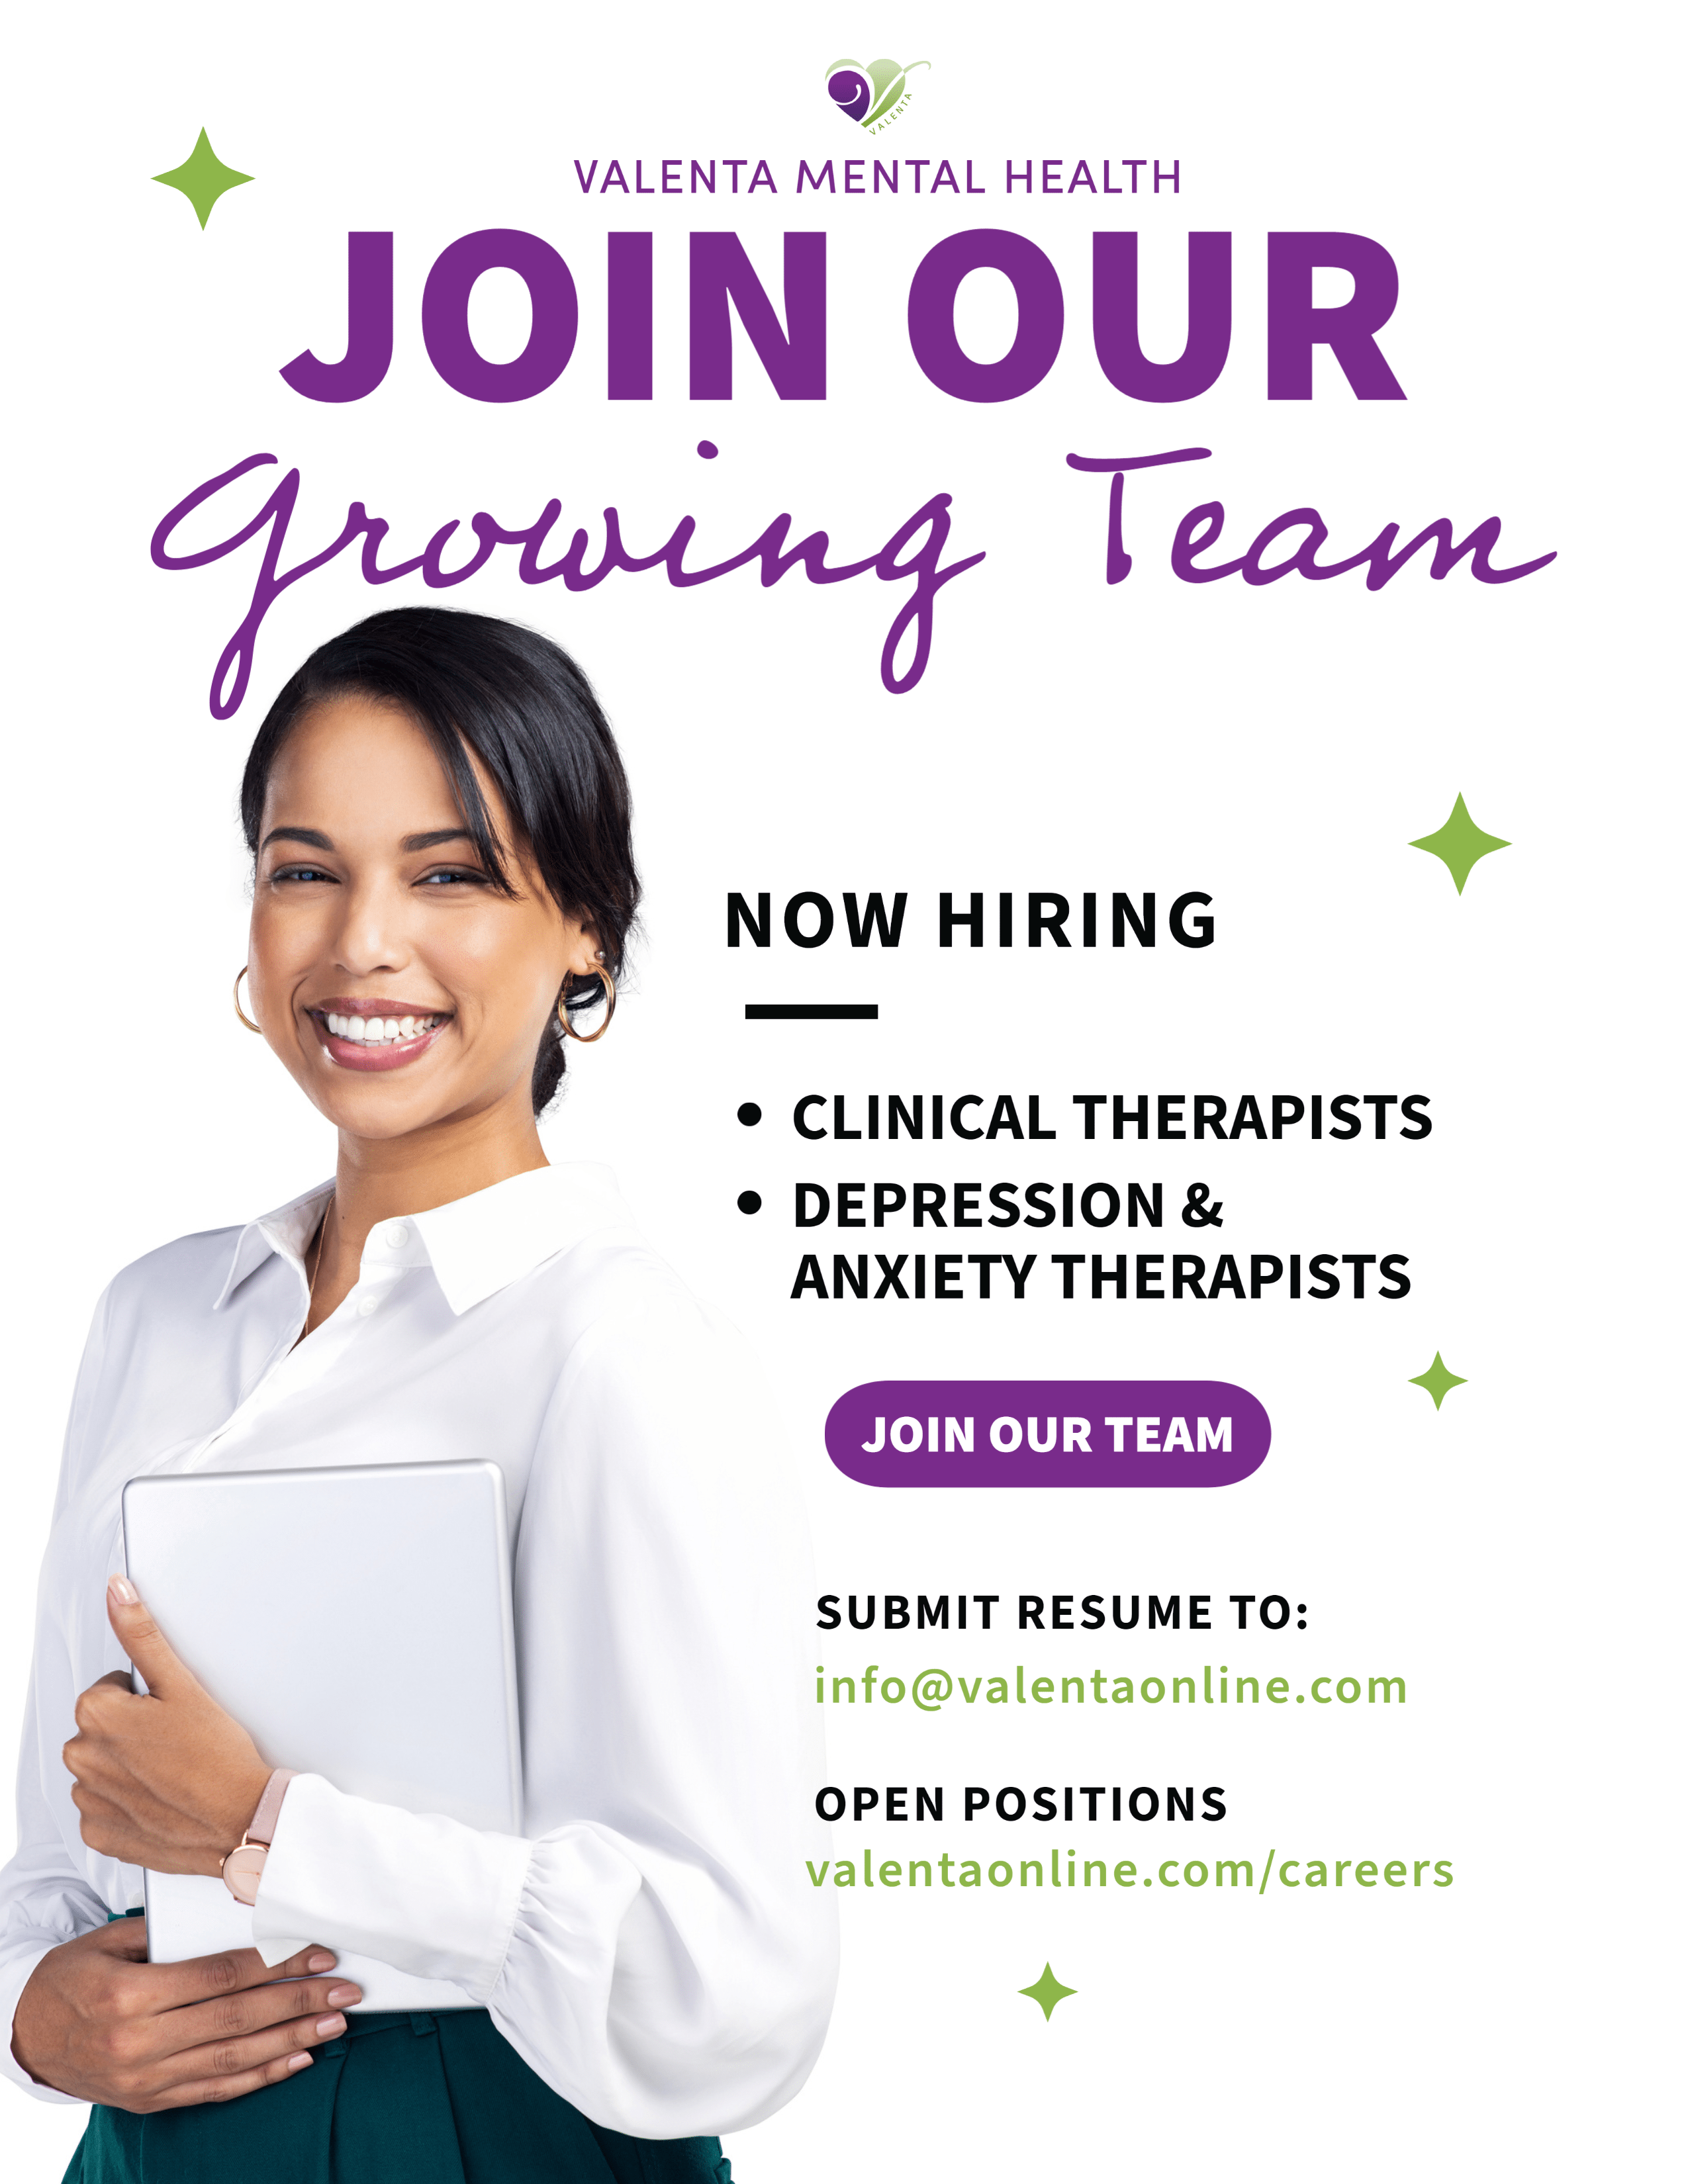 Valenta Mental Health hiring depression therapists, anxiety therapists, clinical therapists, eating disorder therapists, social workers in Rancho, Inland Empire California